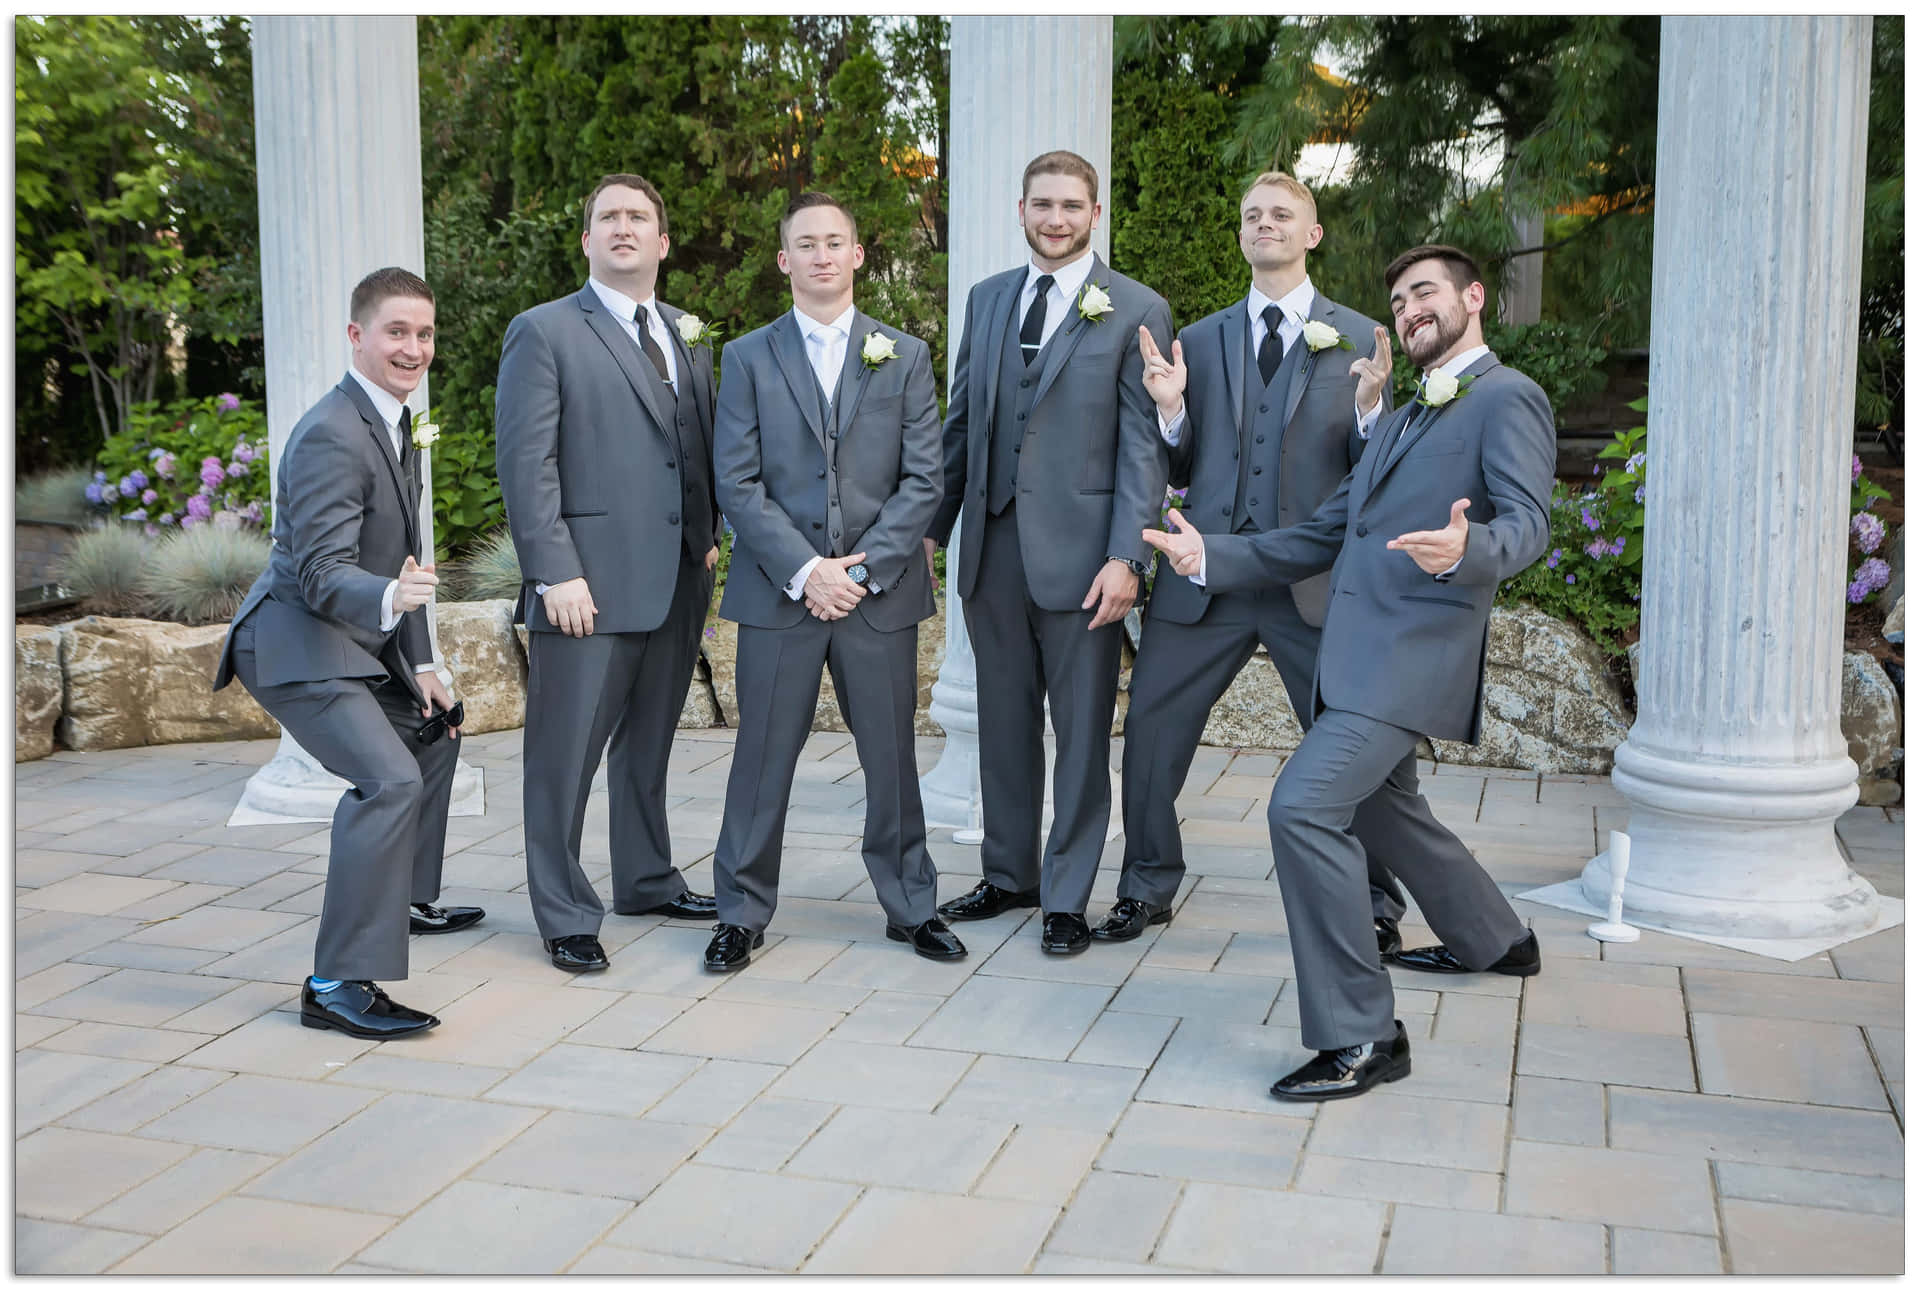 Stylish Wedding Party Groomsmen in Grey Suits